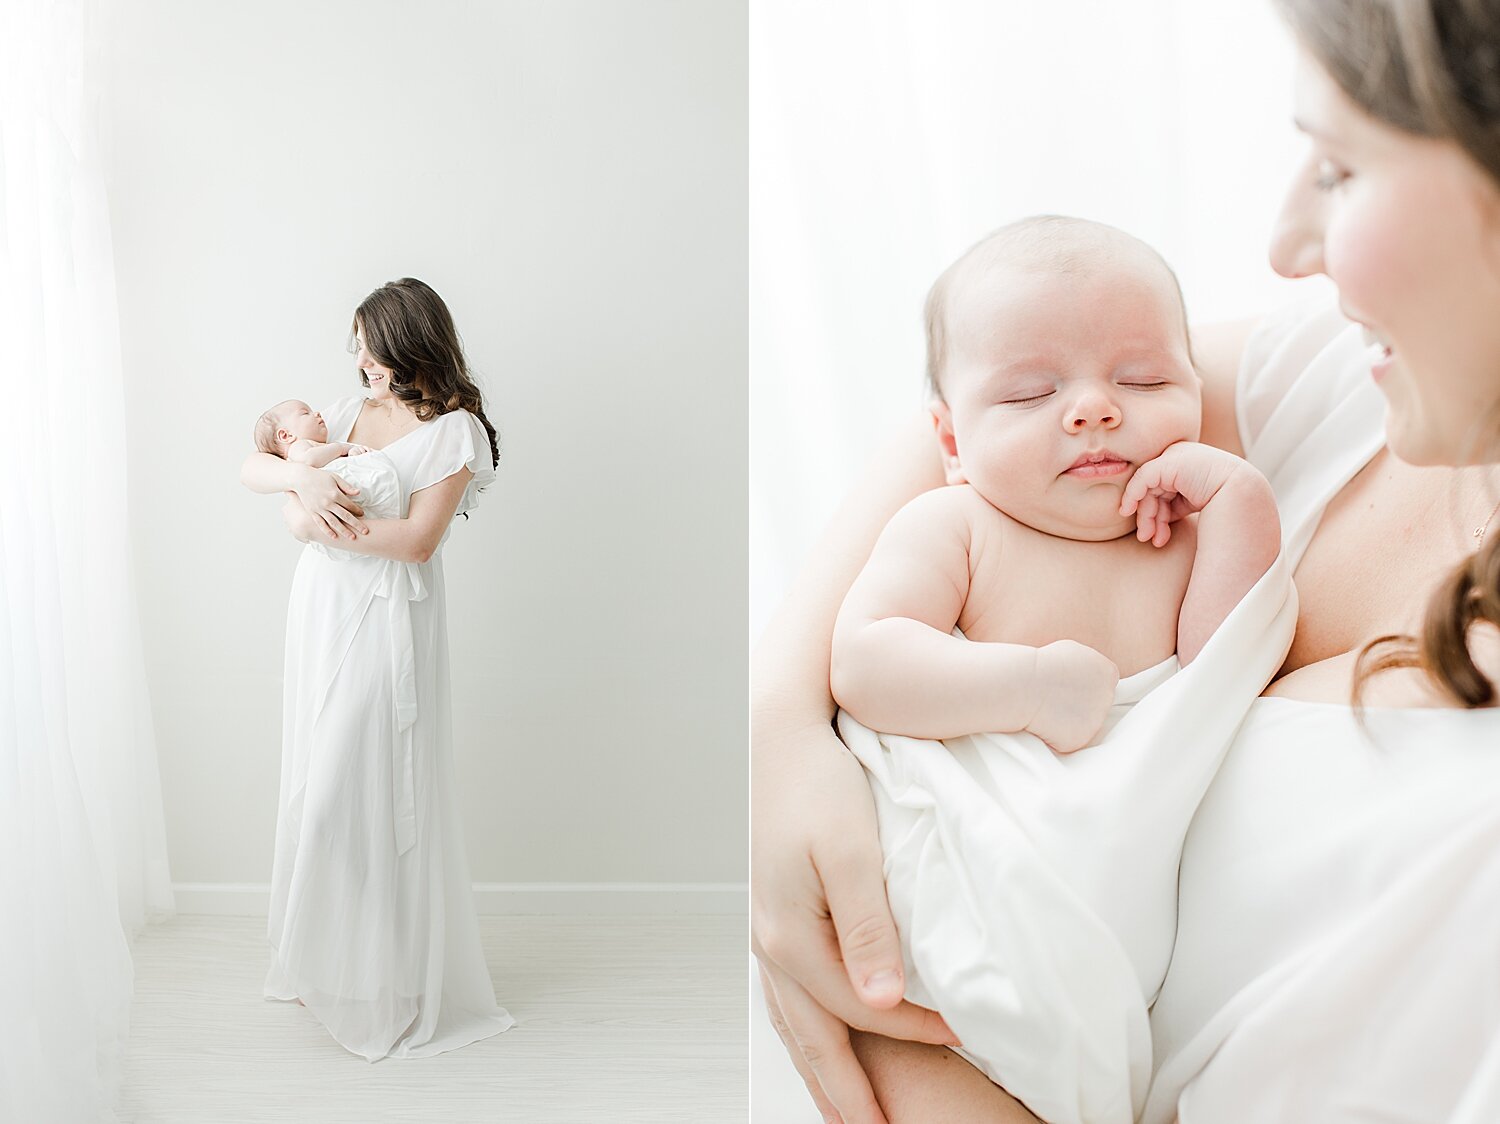 Newborn photoshoot in studio in Fairfield County, CT. Photos by Kristin Wood Photography.